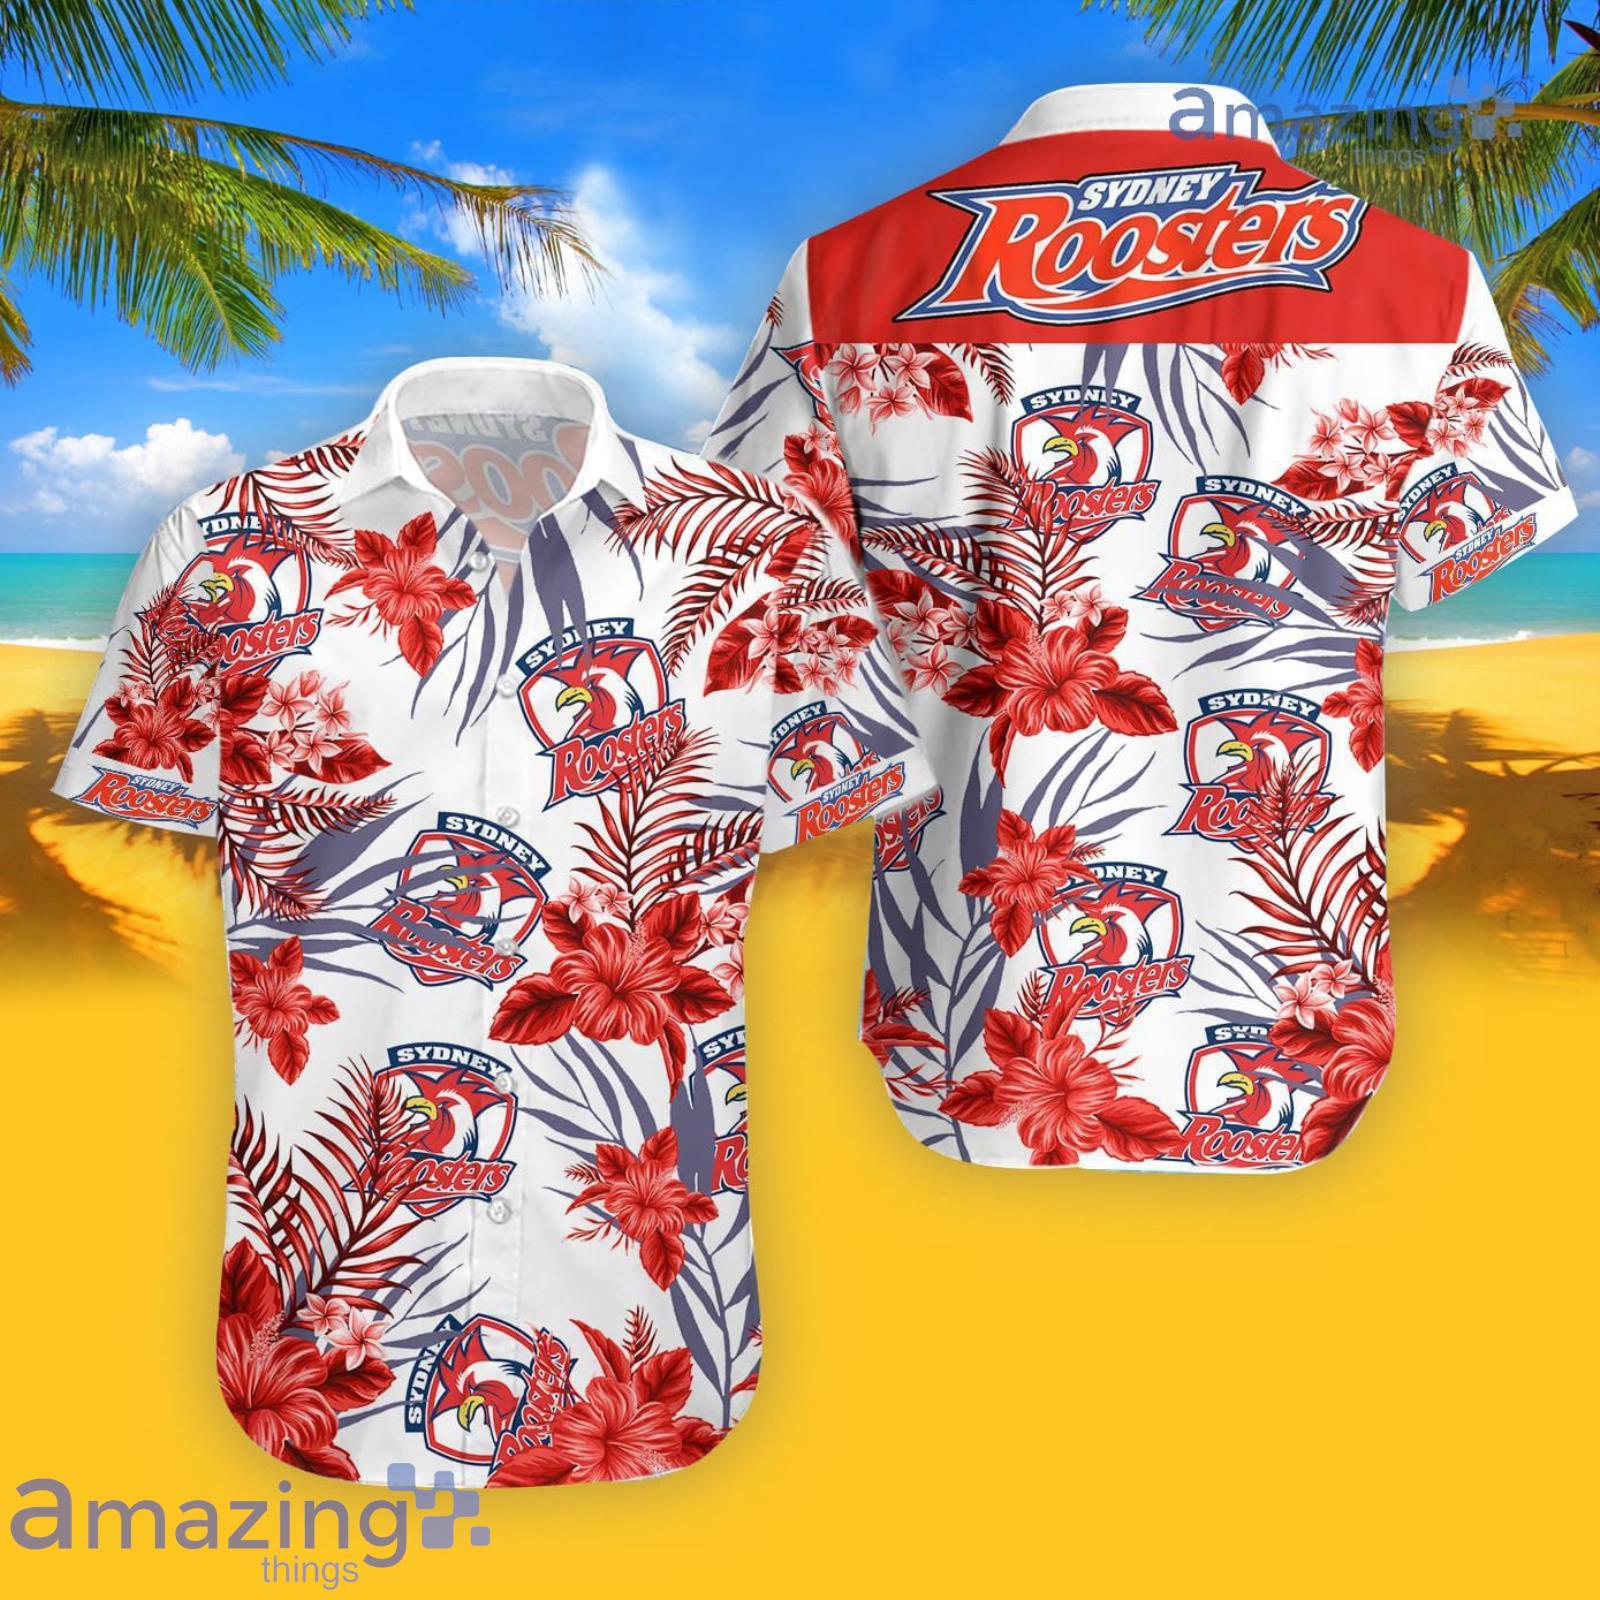 Sydney Roosters Tropical Flower Hawaiian Shirt For Men And Women Product Photo 1